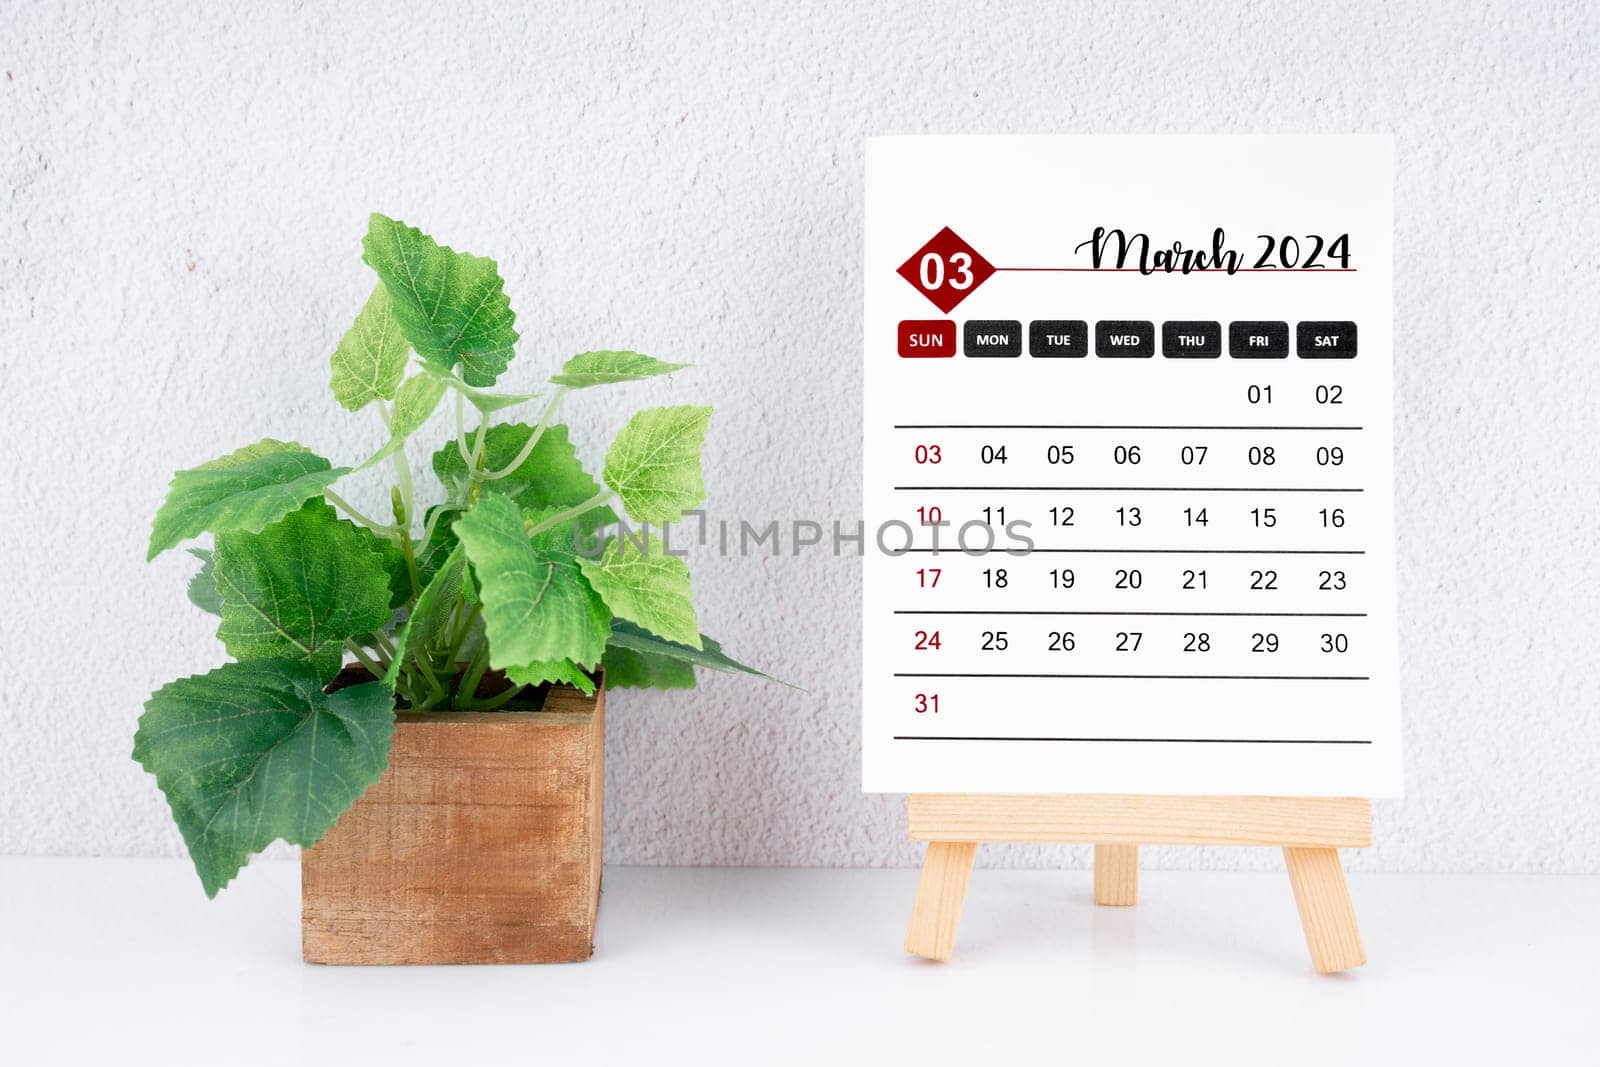 March 2024 calendar page and wooden plant pot on white table.